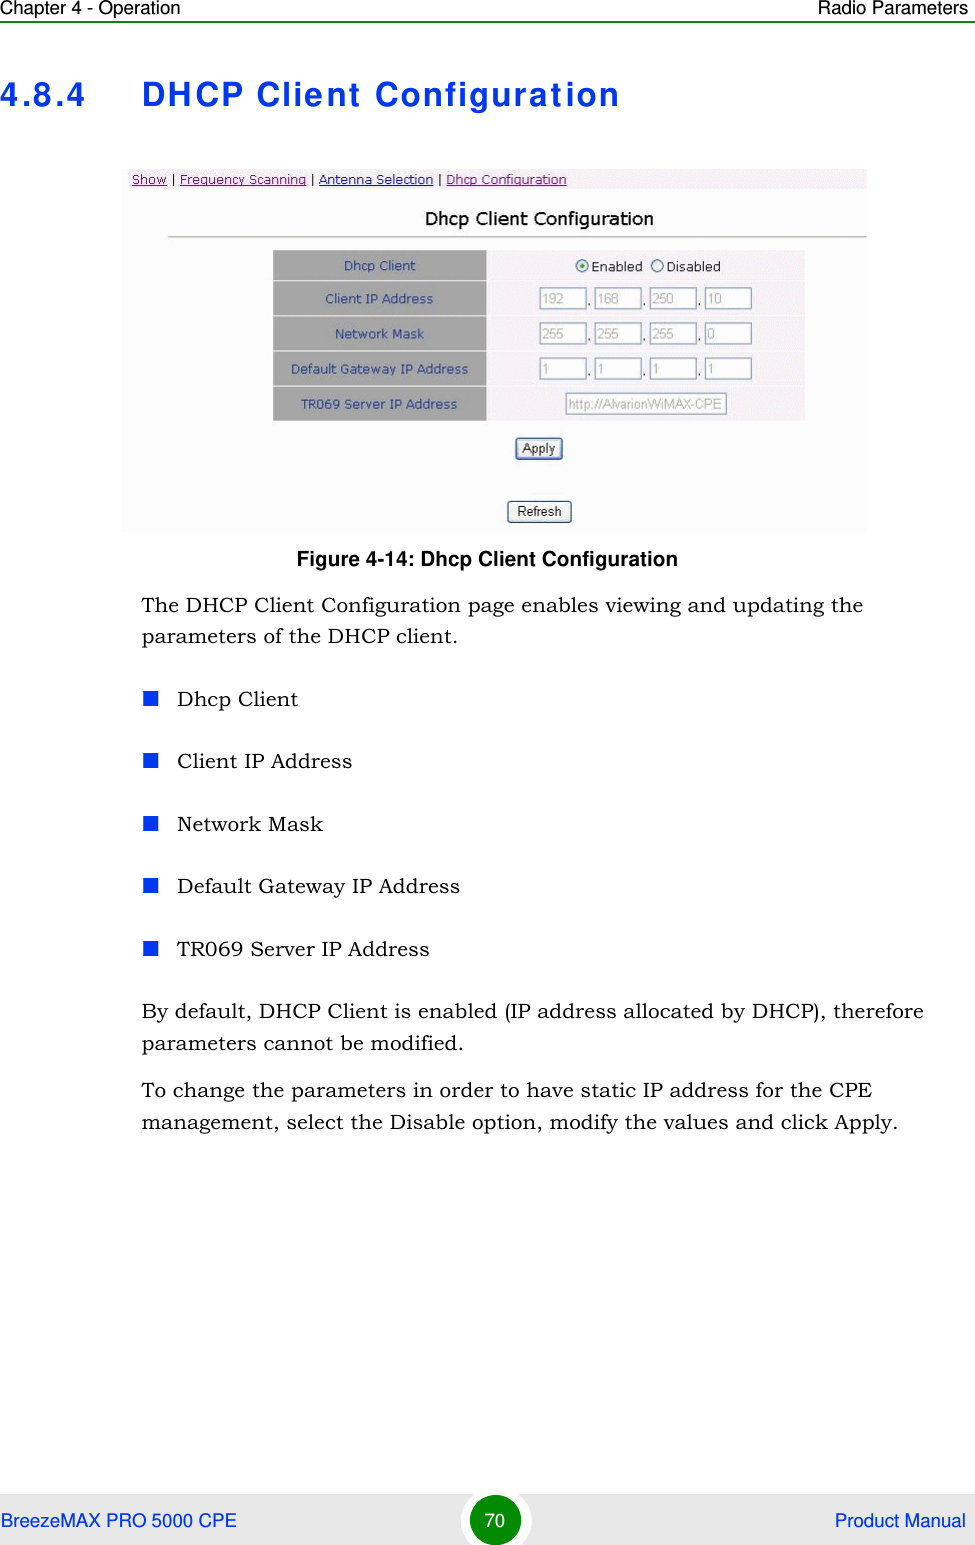 Chapter 4 - Operation Radio ParametersBreezeMAX PRO 5000 CPE 70  Product Manual4.8.4 DHCP Client ConfigurationThe DHCP Client Configuration page enables viewing and updating the parameters of the DHCP client.Dhcp ClientClient IP AddressNetwork MaskDefault Gateway IP AddressTR069 Server IP AddressBy default, DHCP Client is enabled (IP address allocated by DHCP), therefore parameters cannot be modified.To change the parameters in order to have static IP address for the CPE management, select the Disable option, modify the values and click Apply. Figure 4-14: Dhcp Client Configuration